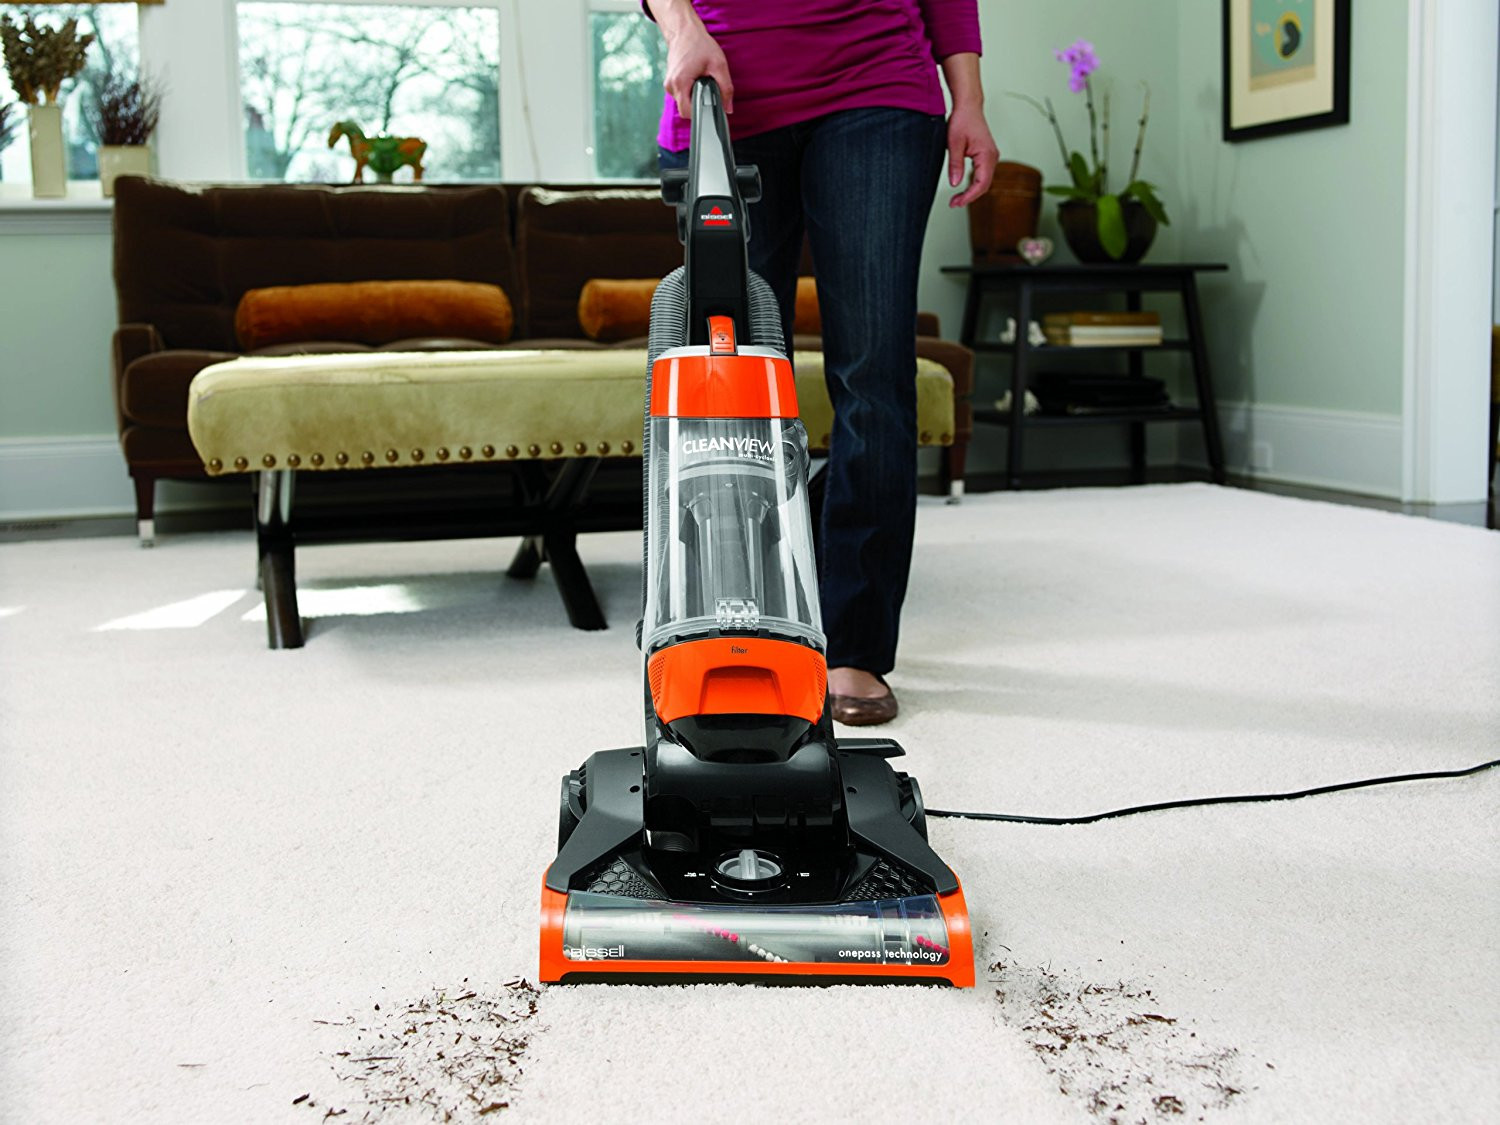 30 Trendy Best Stick Vacuum for Pet Hair On Hardwood Floors 2024 free download best stick vacuum for pet hair on hardwood floors of the 9 best cheap vacuum cleaners in 2017 our reviews regarding bissell cleanview strong suction power